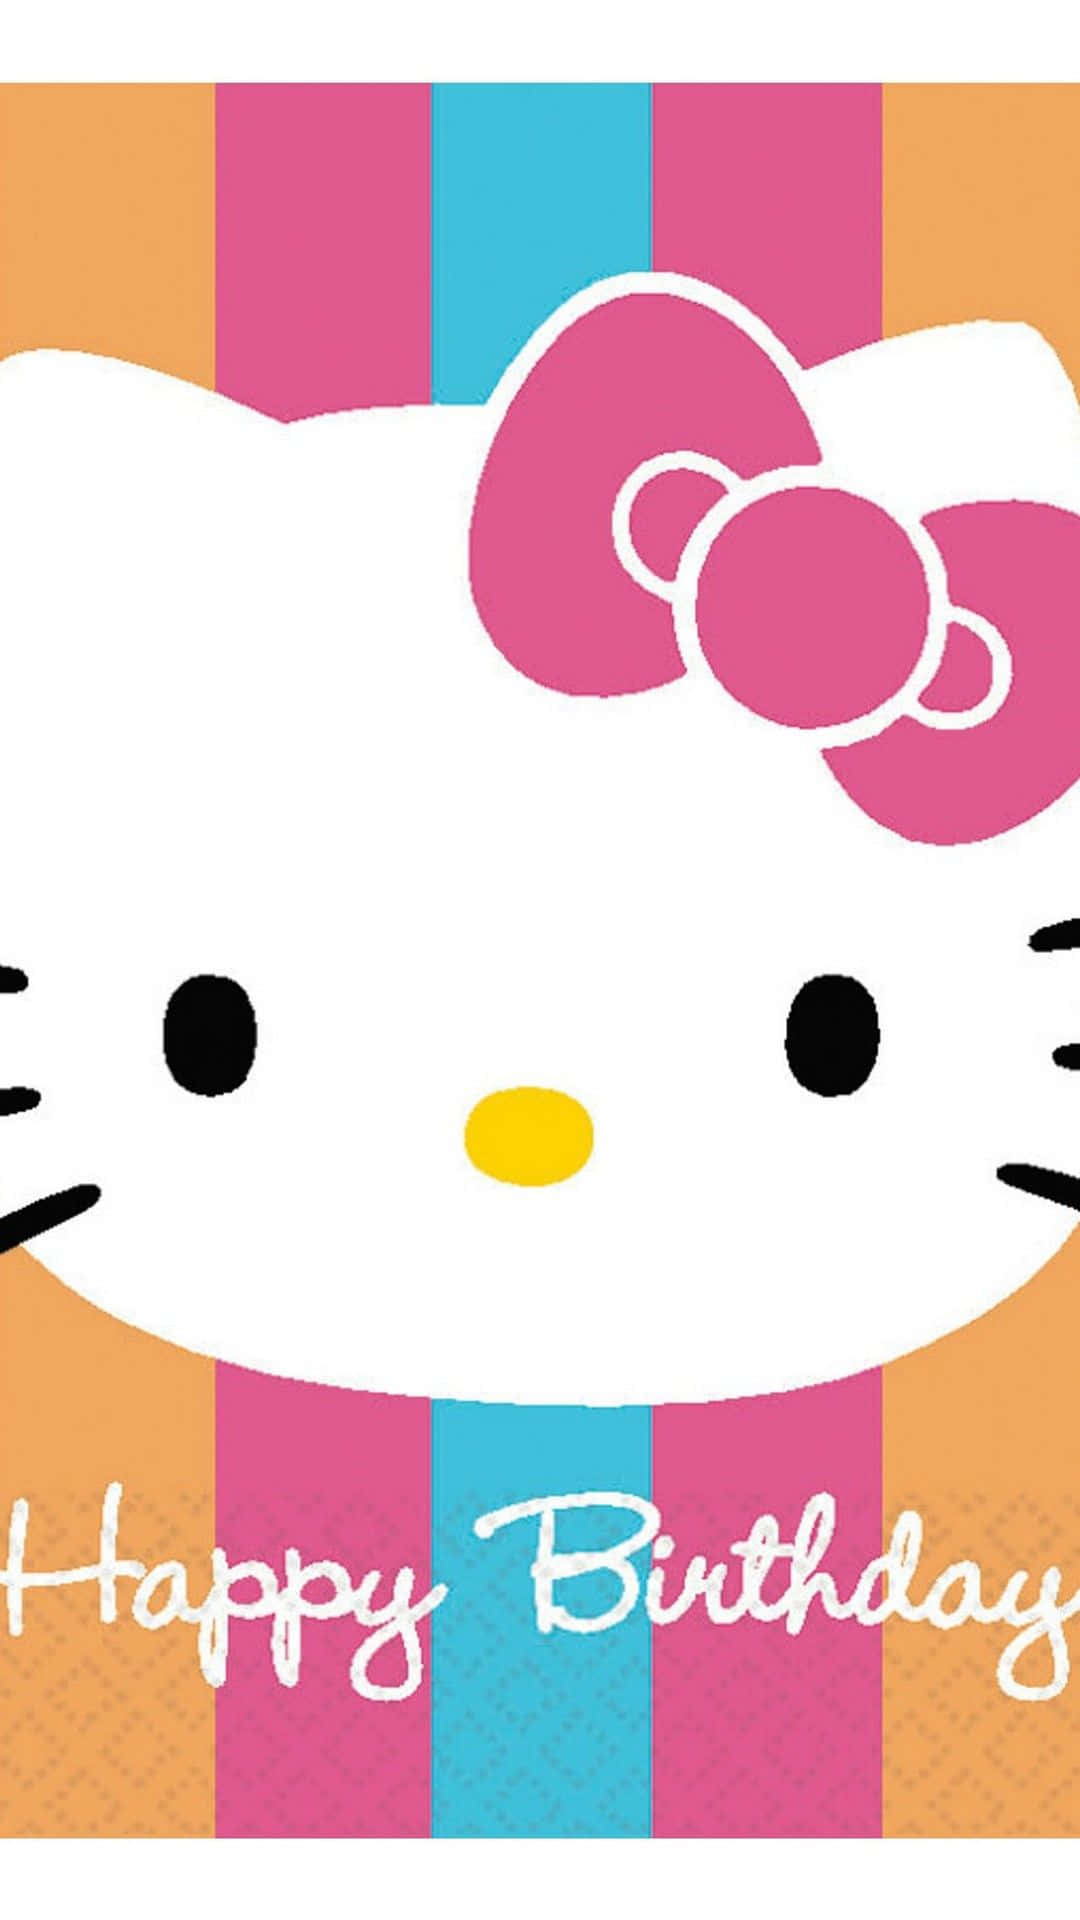 Hello Kitty Birthday Card With A Pink And Orange Background Wallpaper